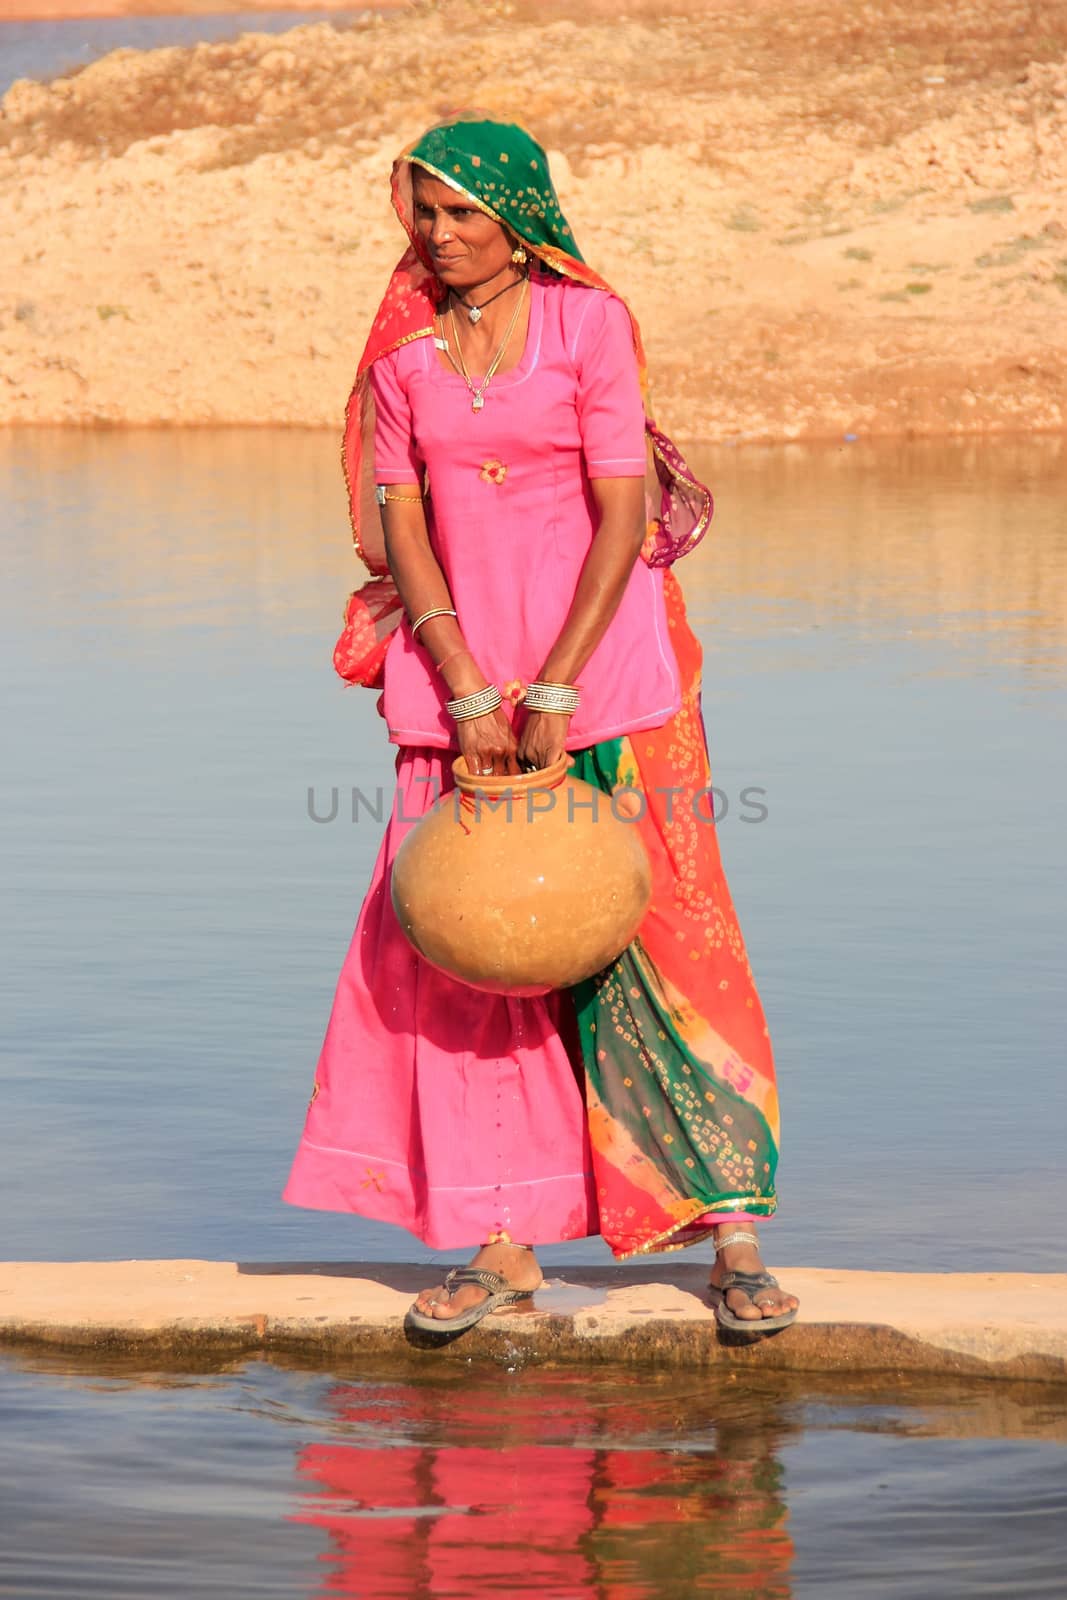 Local woman getting water from reservoir, Khichan village, India by donya_nedomam